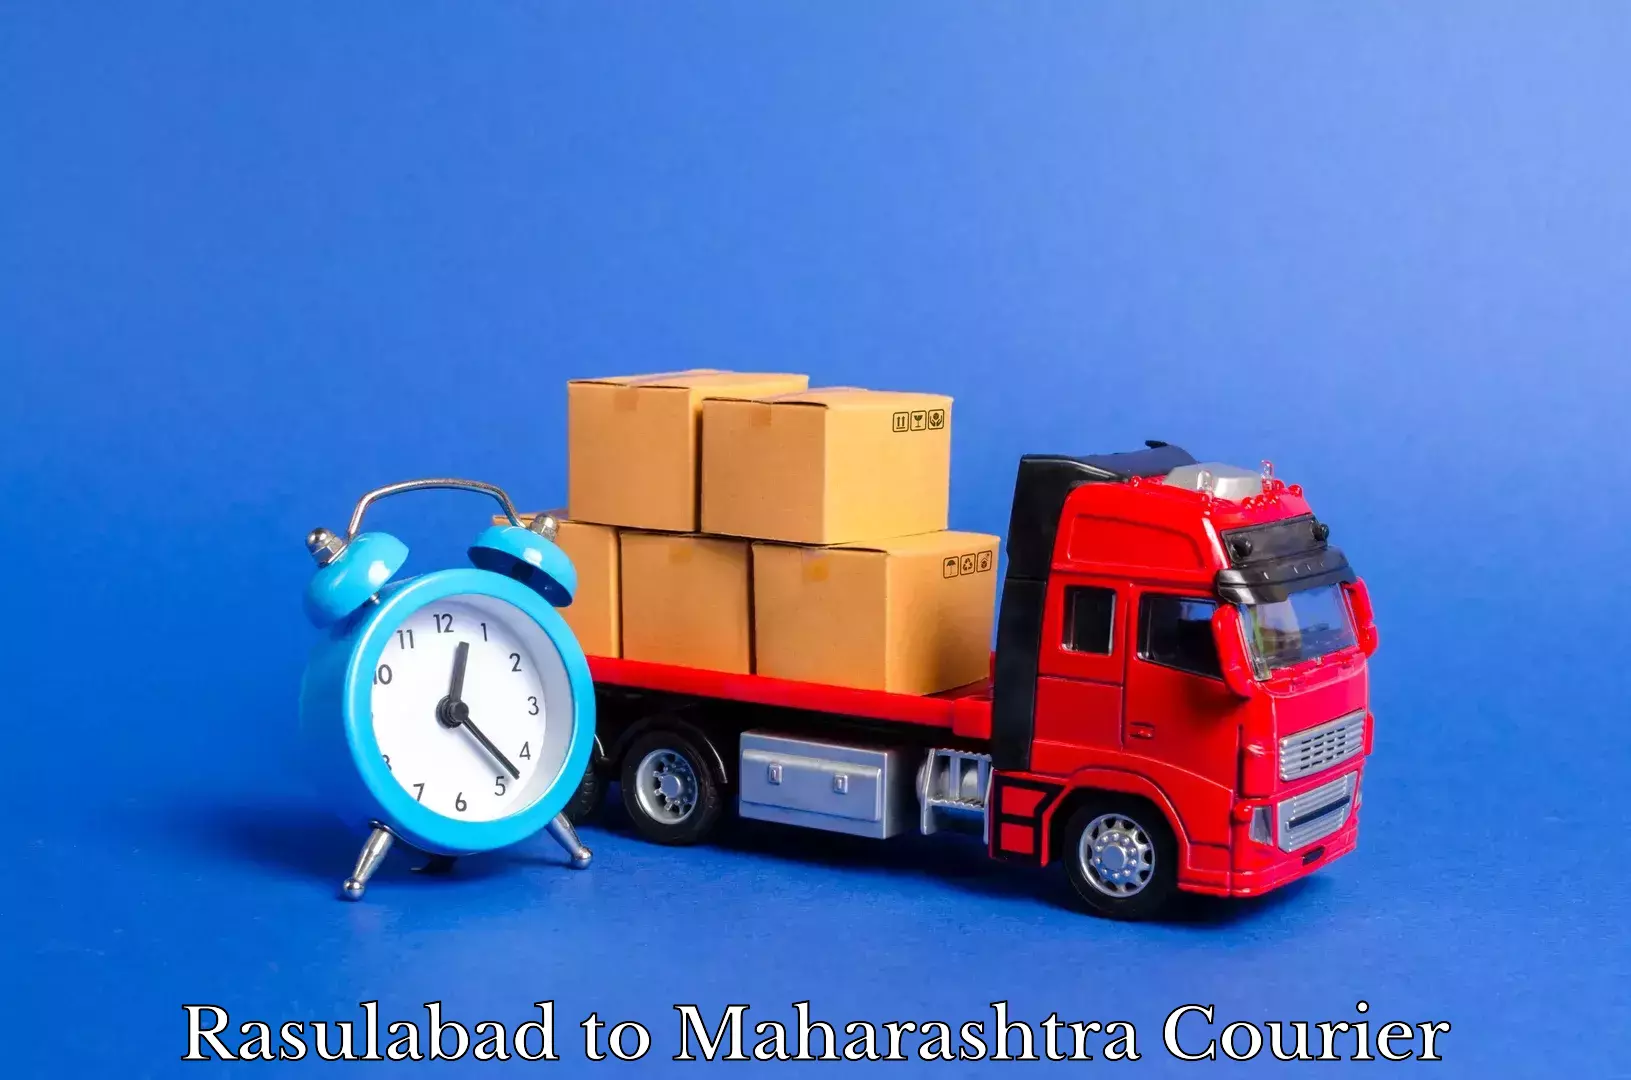 Furniture delivery service Rasulabad to Kalbadevi